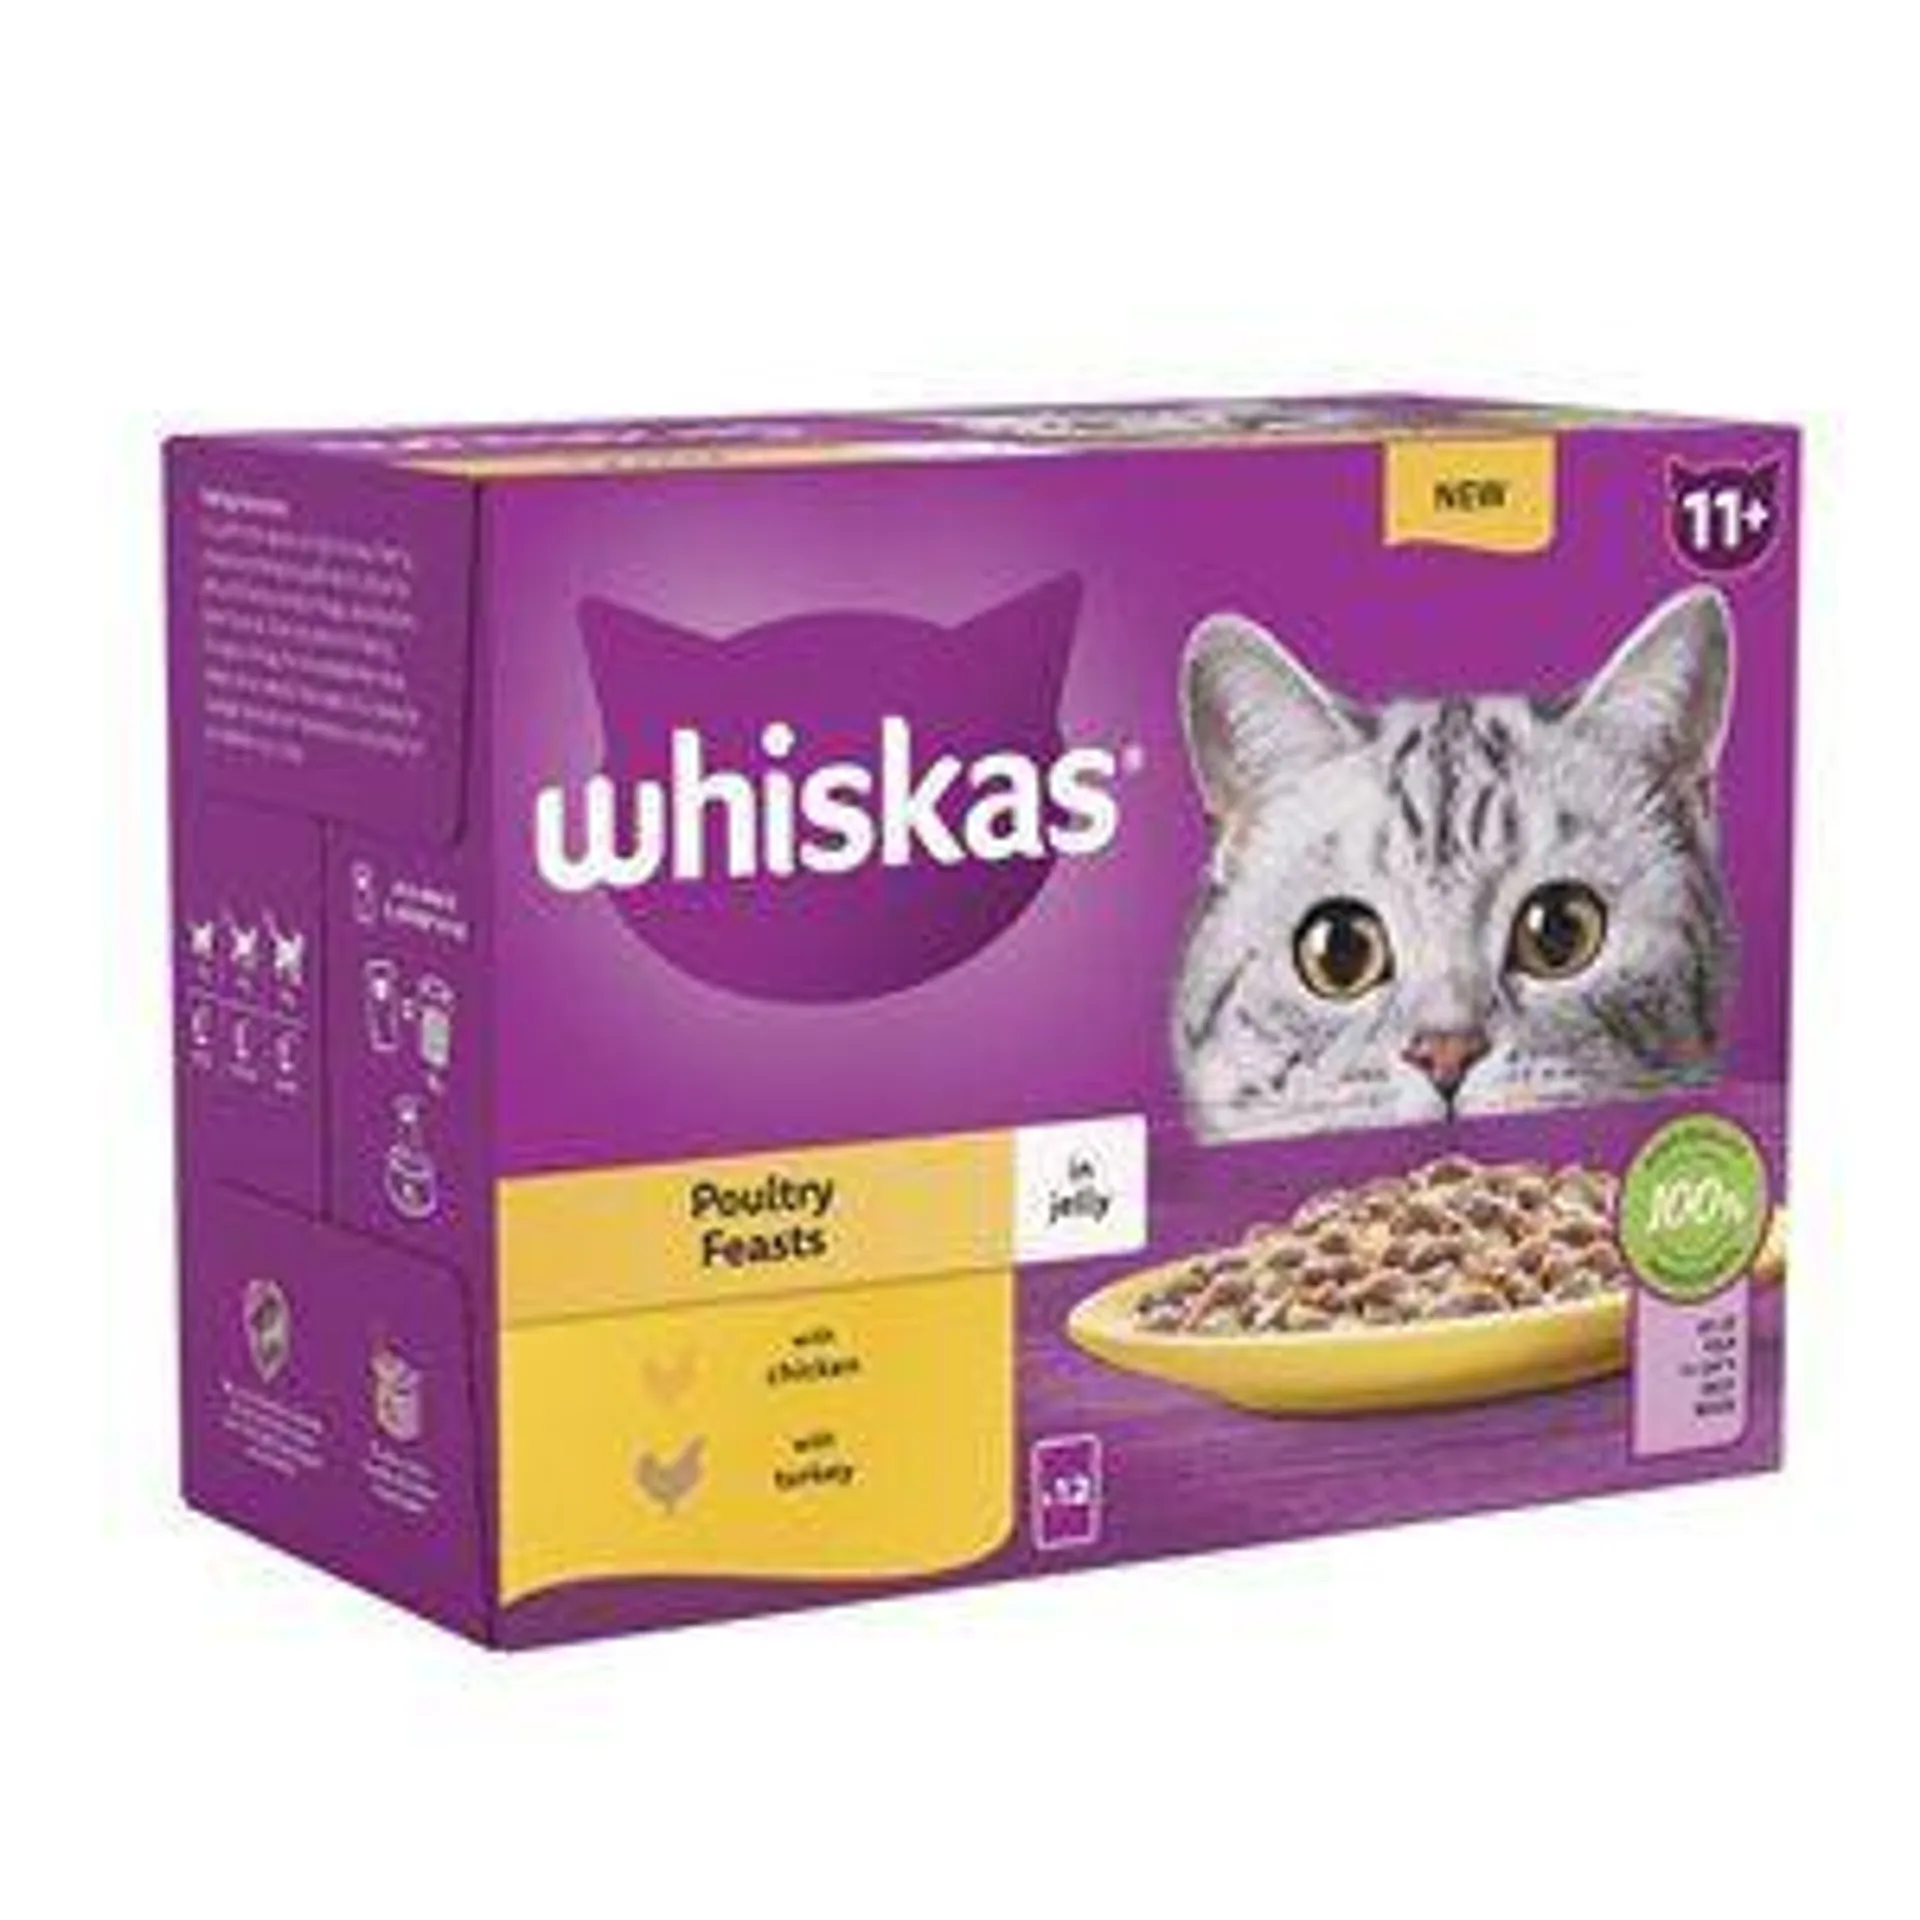 Whiskas 11+ Poultry Feasts In Jelly Multipack